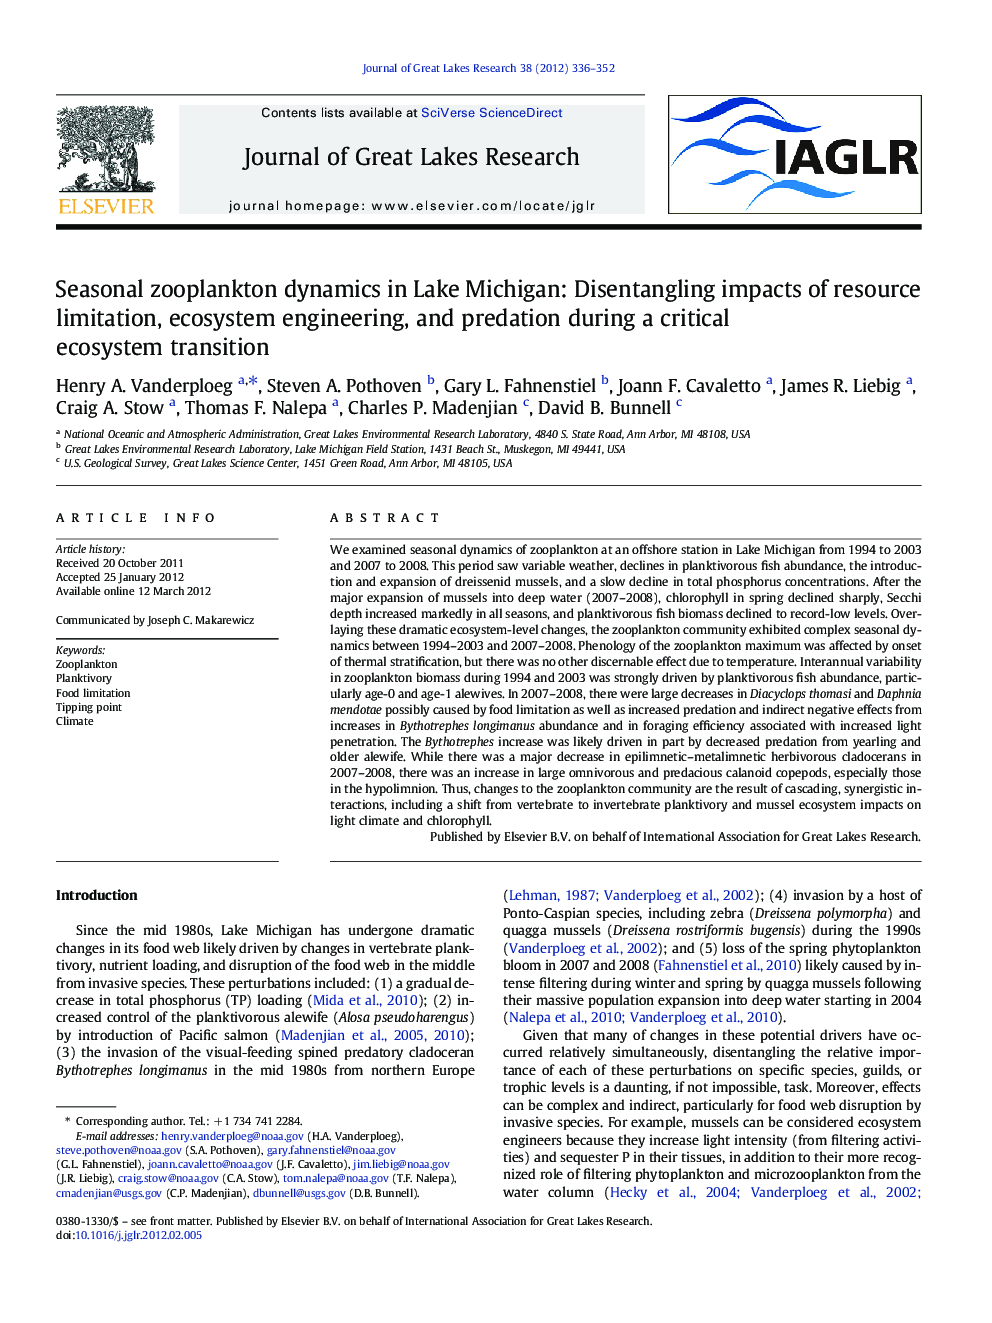 Seasonal zooplankton dynamics in Lake Michigan: Disentangling impacts of resource limitation, ecosystem engineering, and predation during a critical ecosystem transition